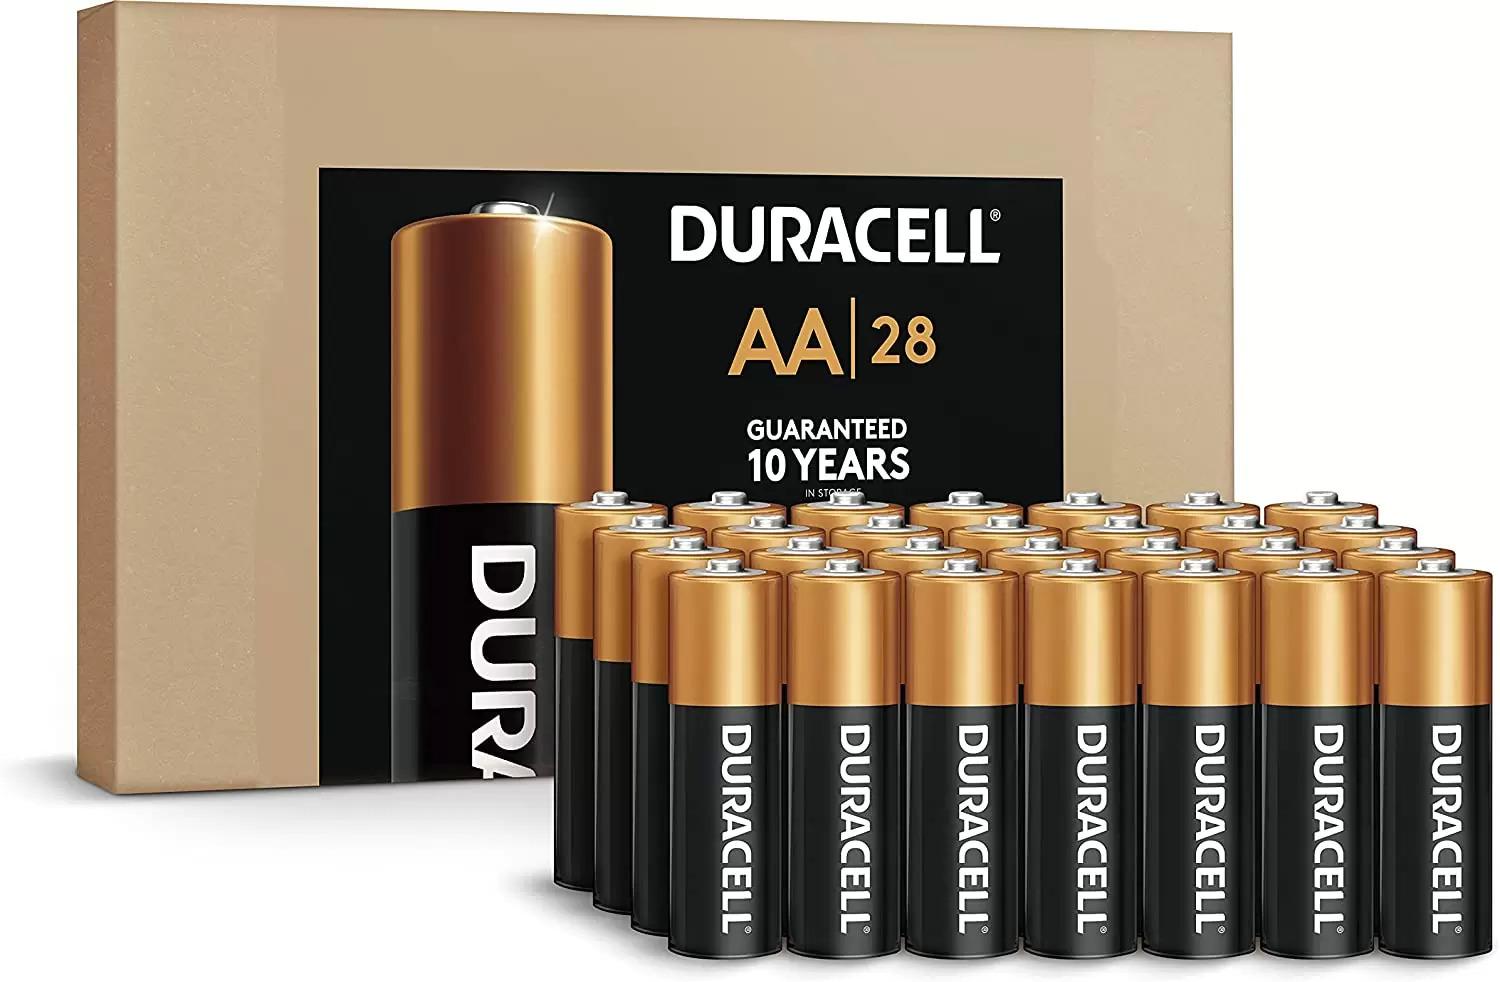 28 Duracell Coppertop AA Batteries for $12.63 Shipped